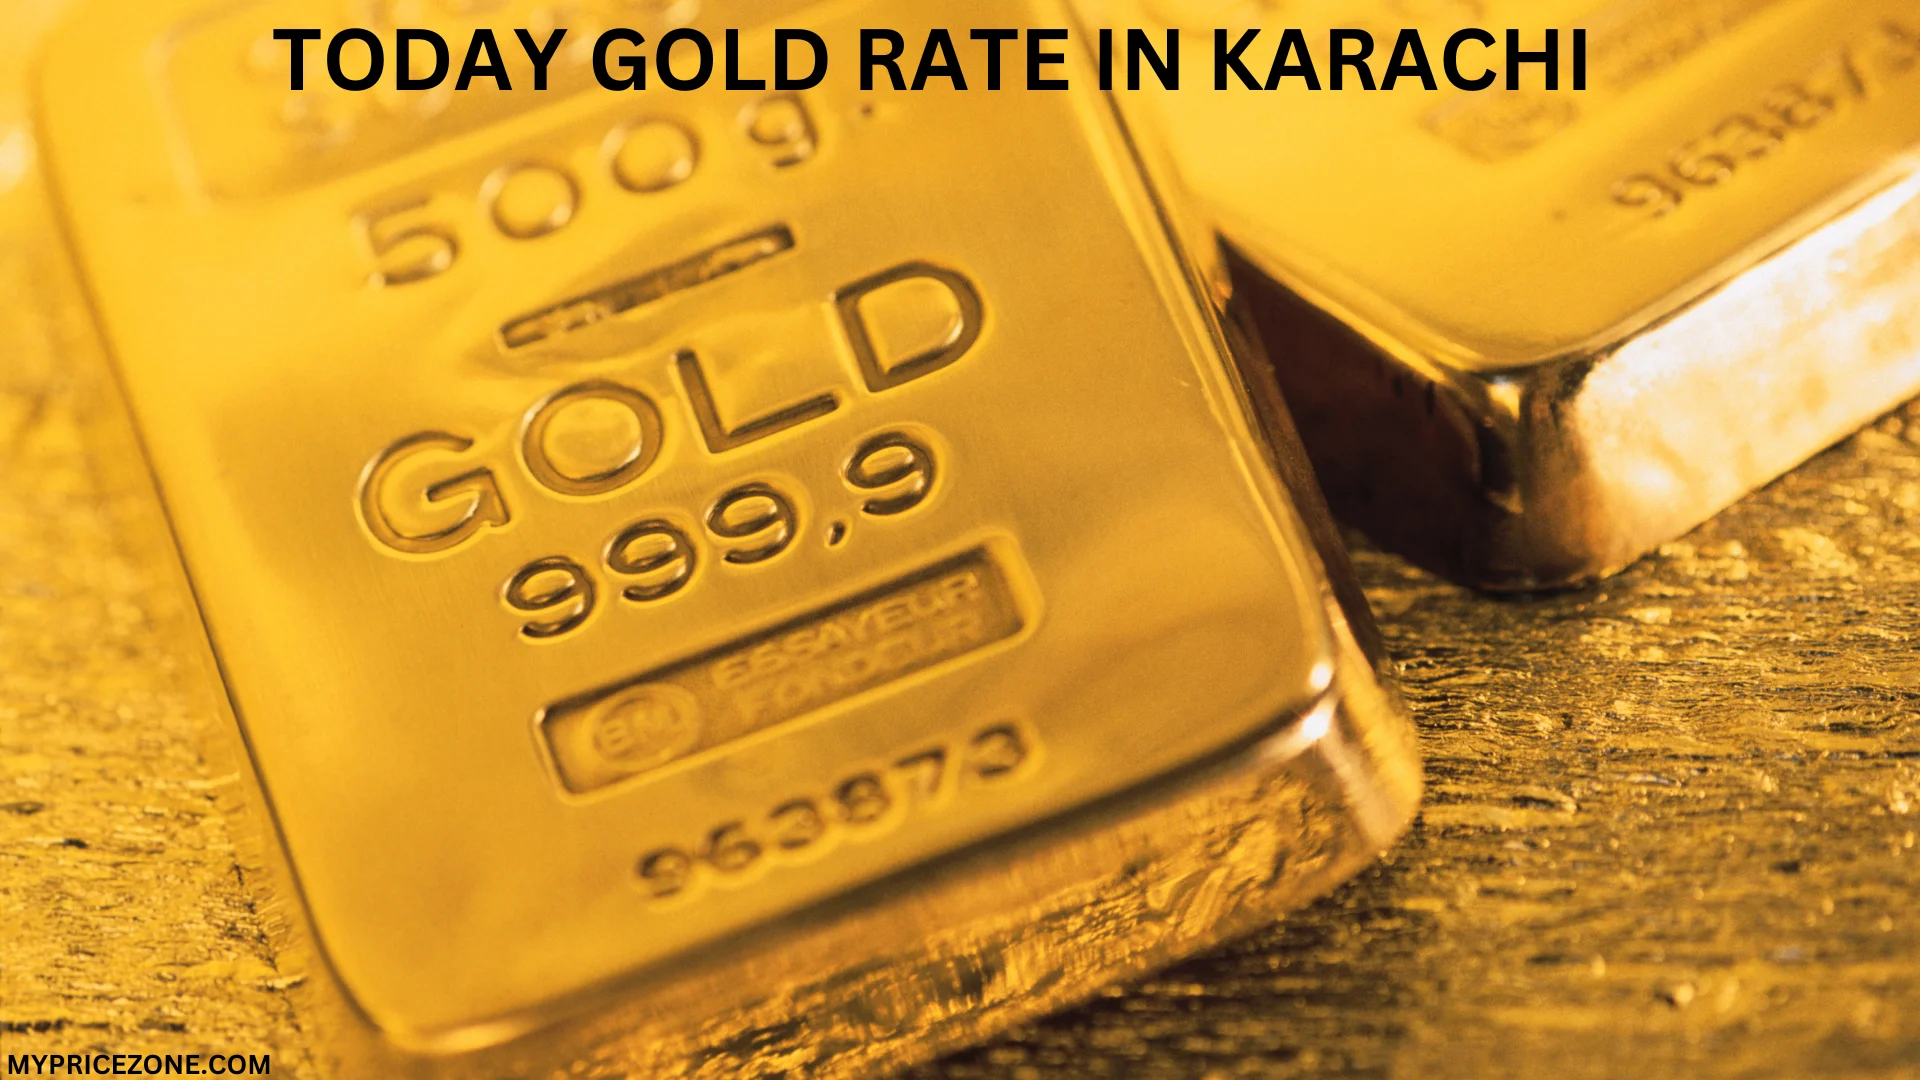 GOLD BARS WITH TODAY GOLD RATE IN KARACHI